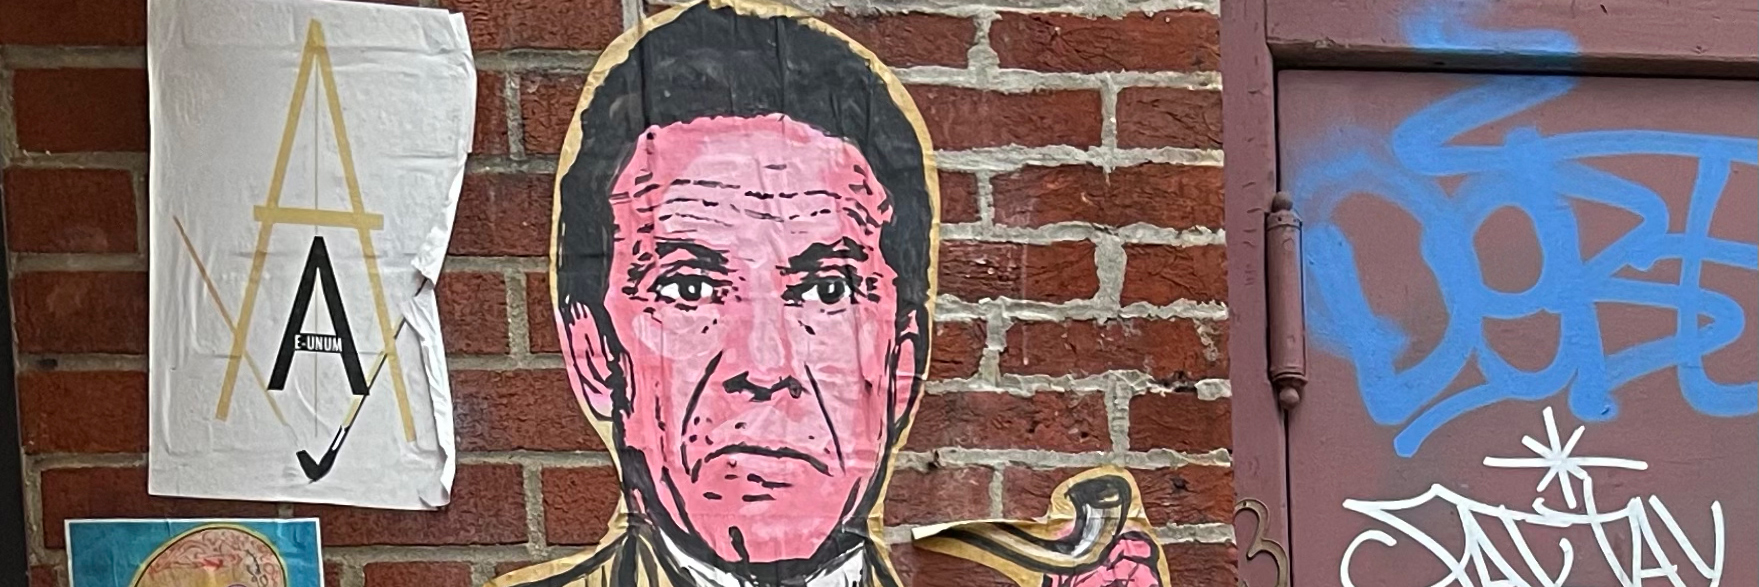 Governor Cuomo Resigns: Street Art May Have Seen it Coming